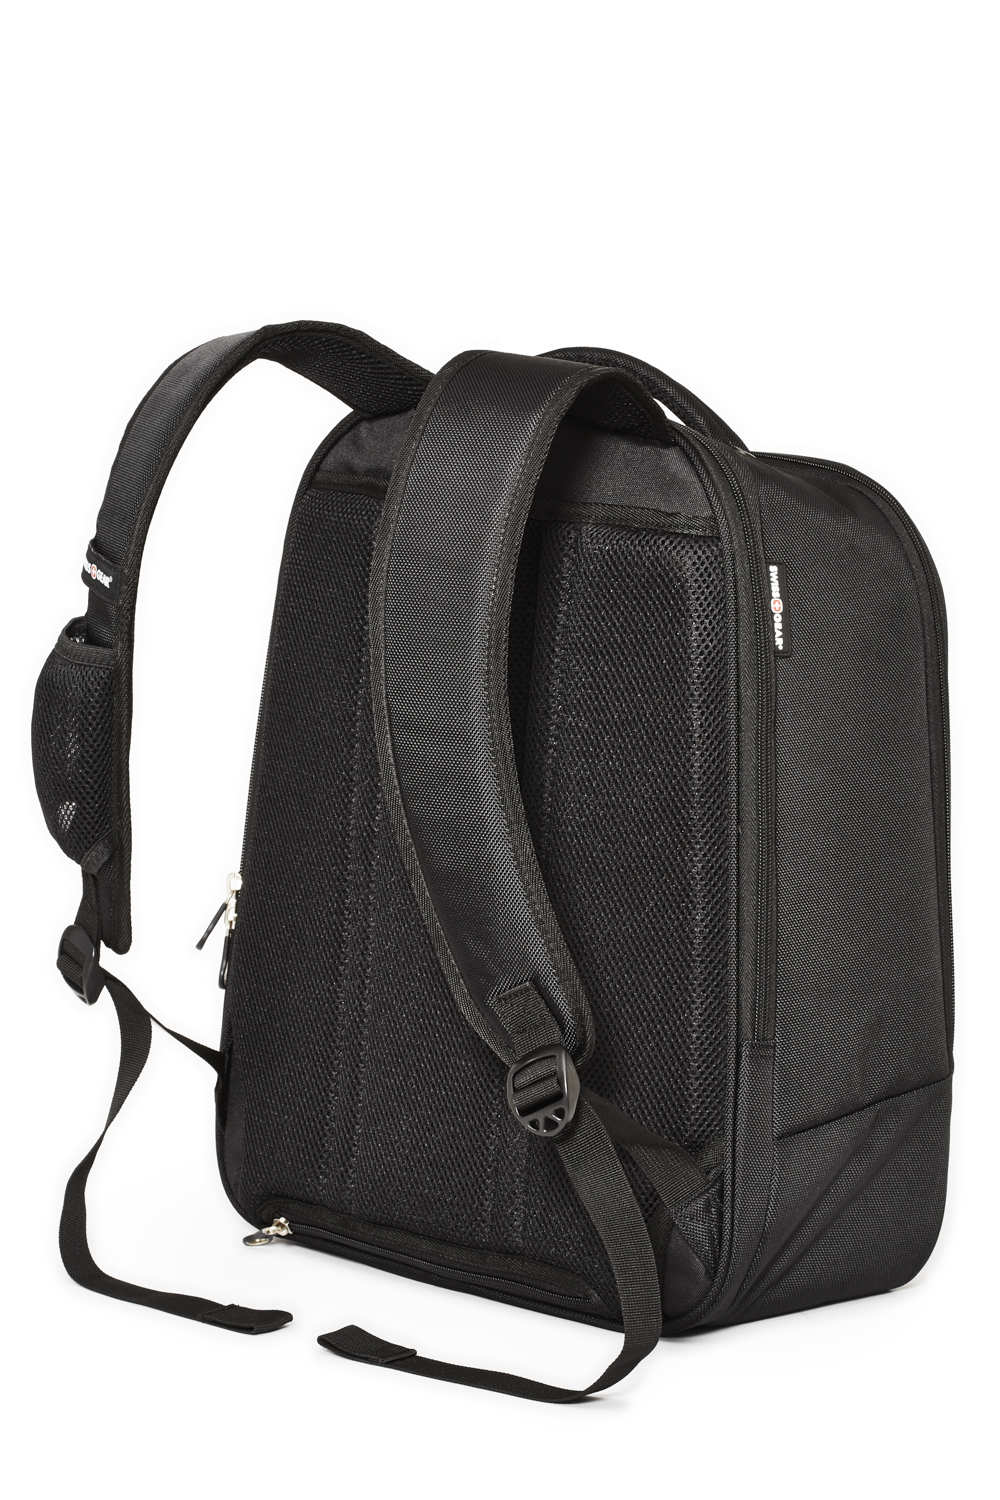 Swissgear 2328 17-inch Laptop and Tablet Backpack - Black